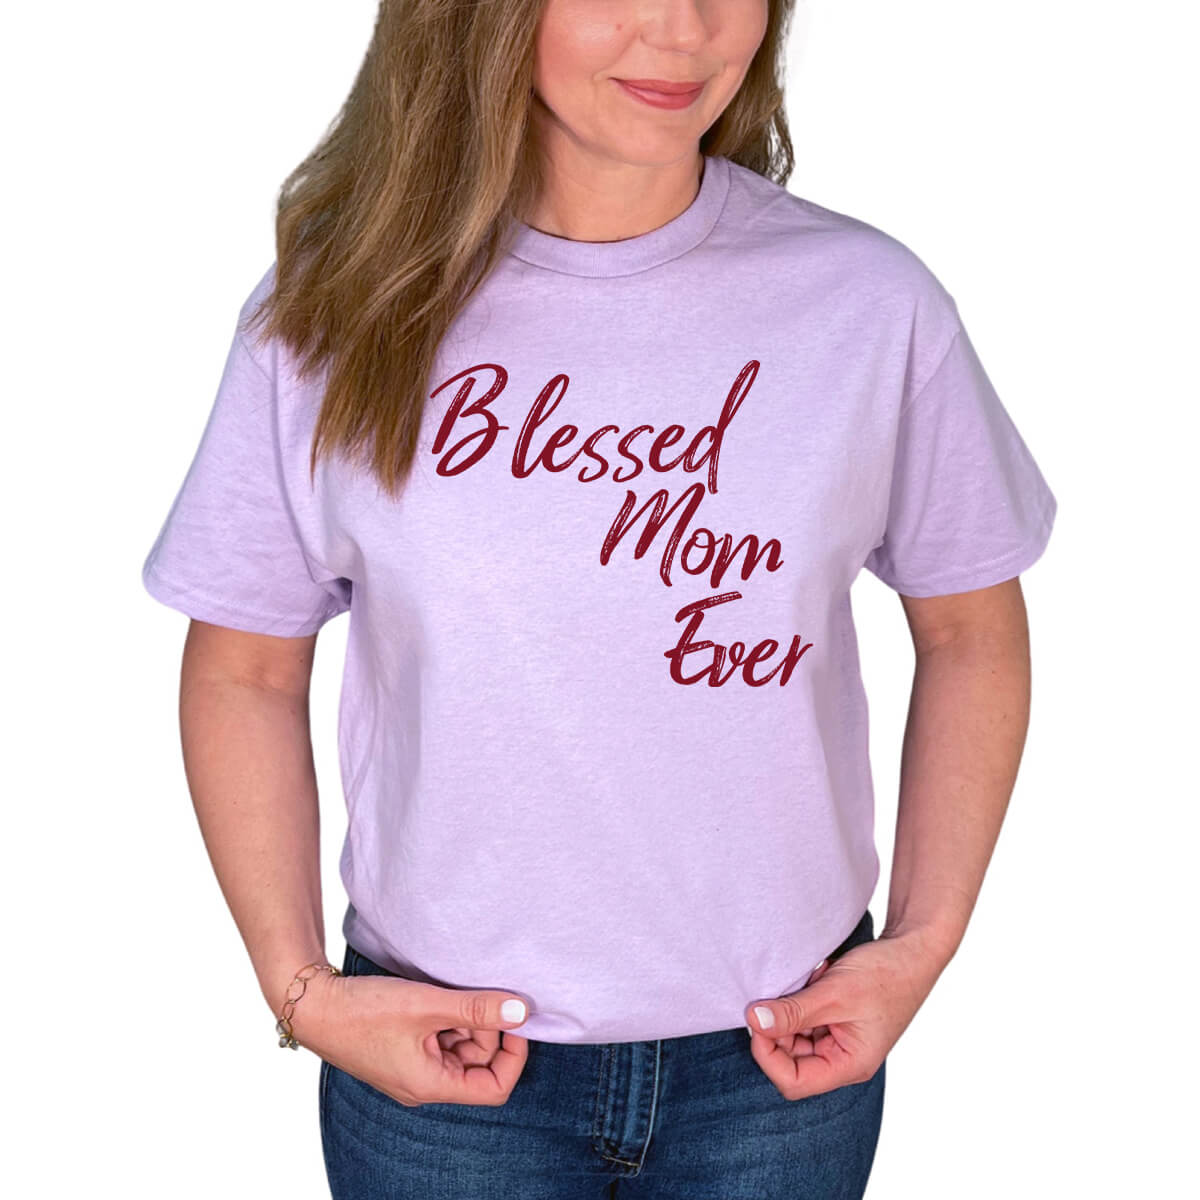 Blessed Mom Ever T-Shirt